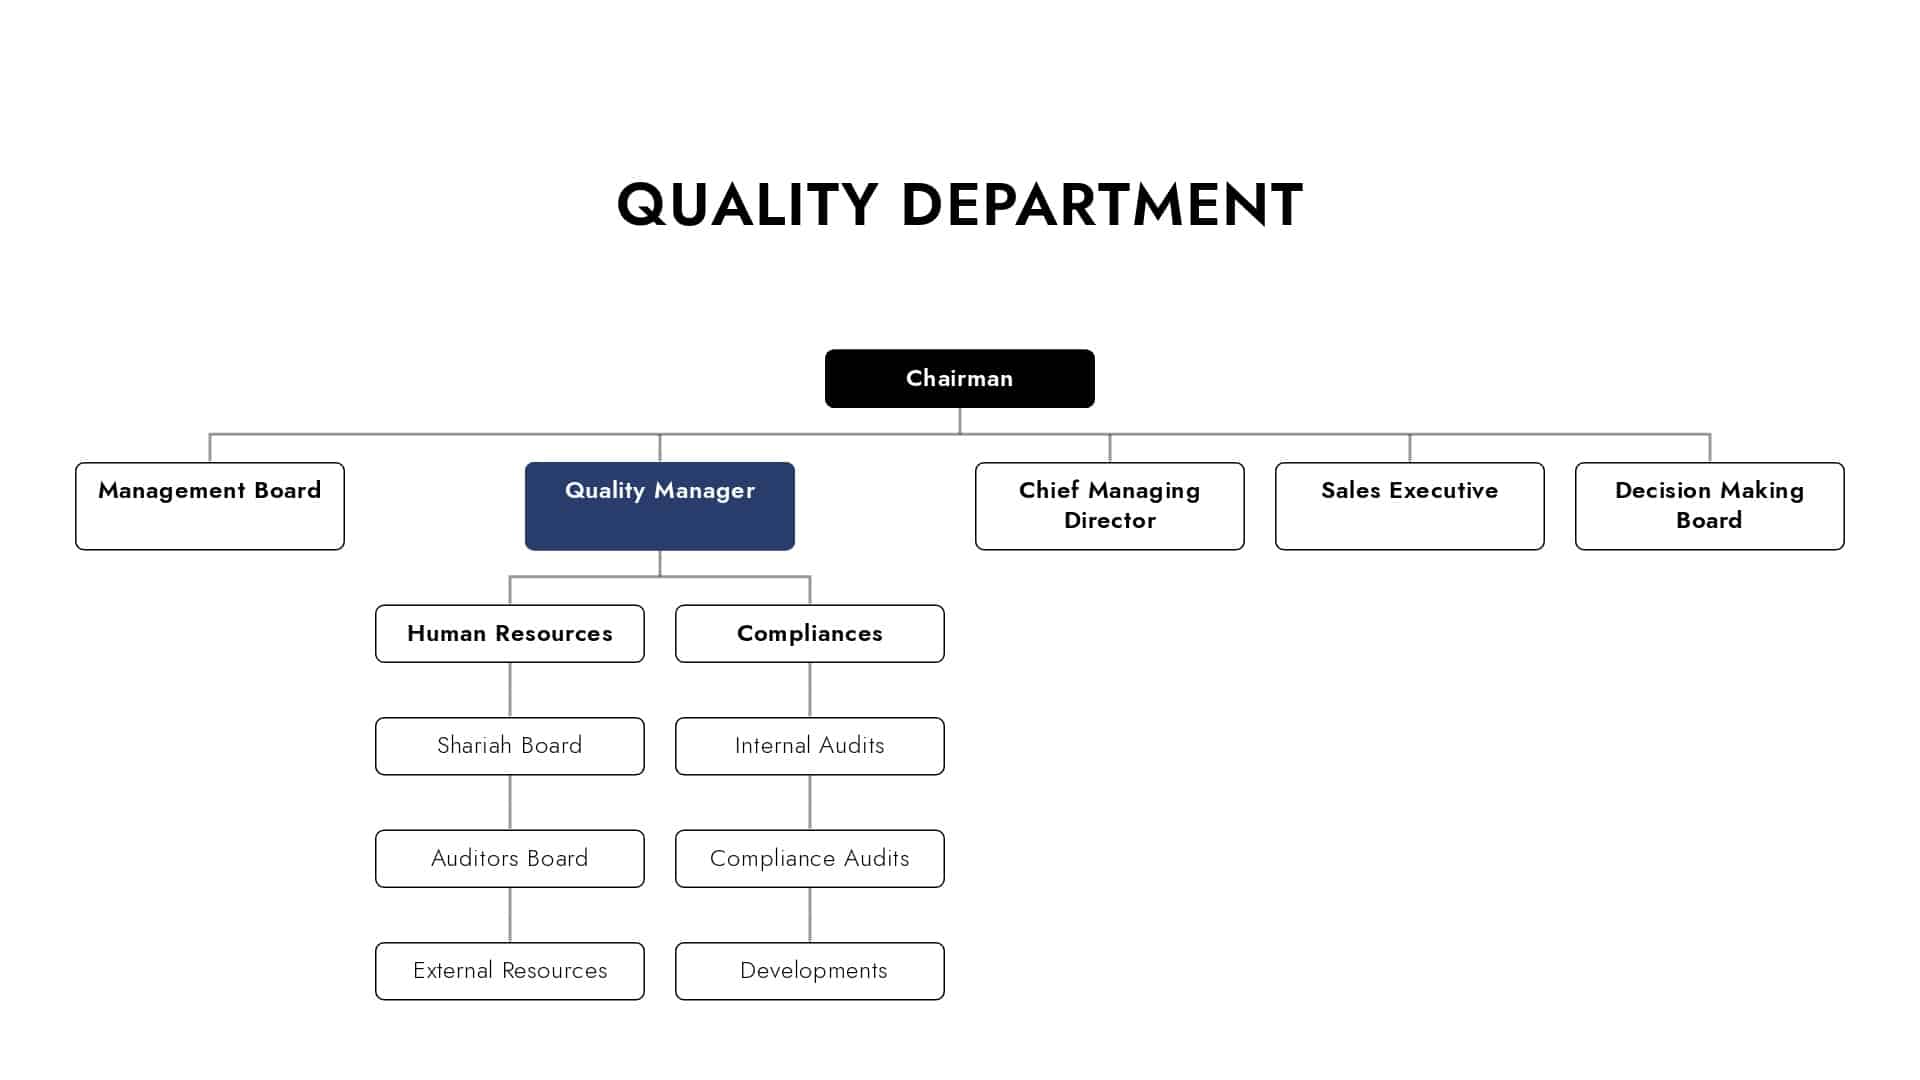 HQC Netherlands Org Structure Quality Department